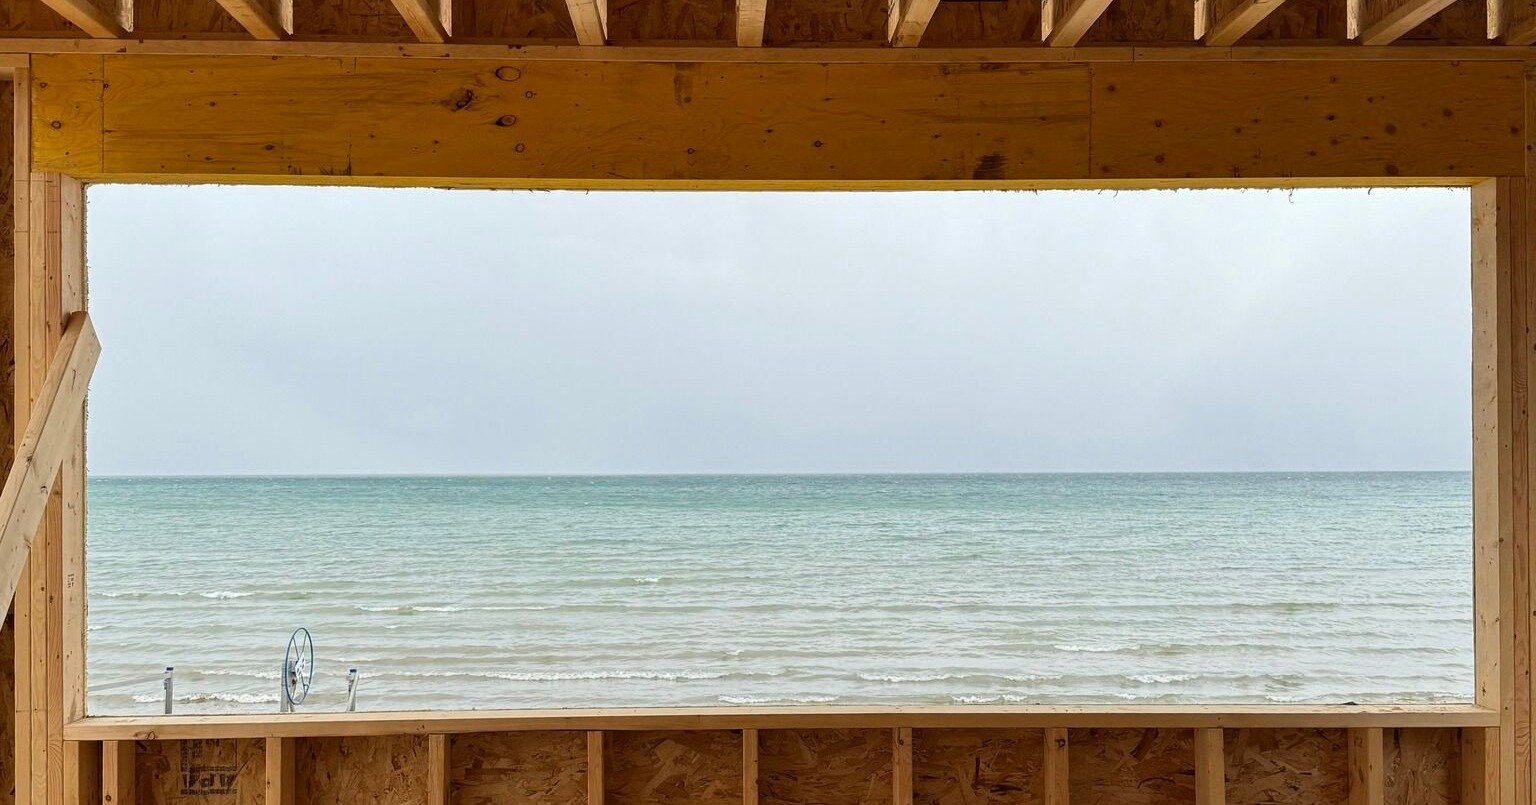 🪜Framing is underway! The best part of designing and building on the water is appreciating the views. This kitchen opening will make one feel like they are on the water while having breakfast on the Island. 🏝️ That horizon line couldn't get any bet